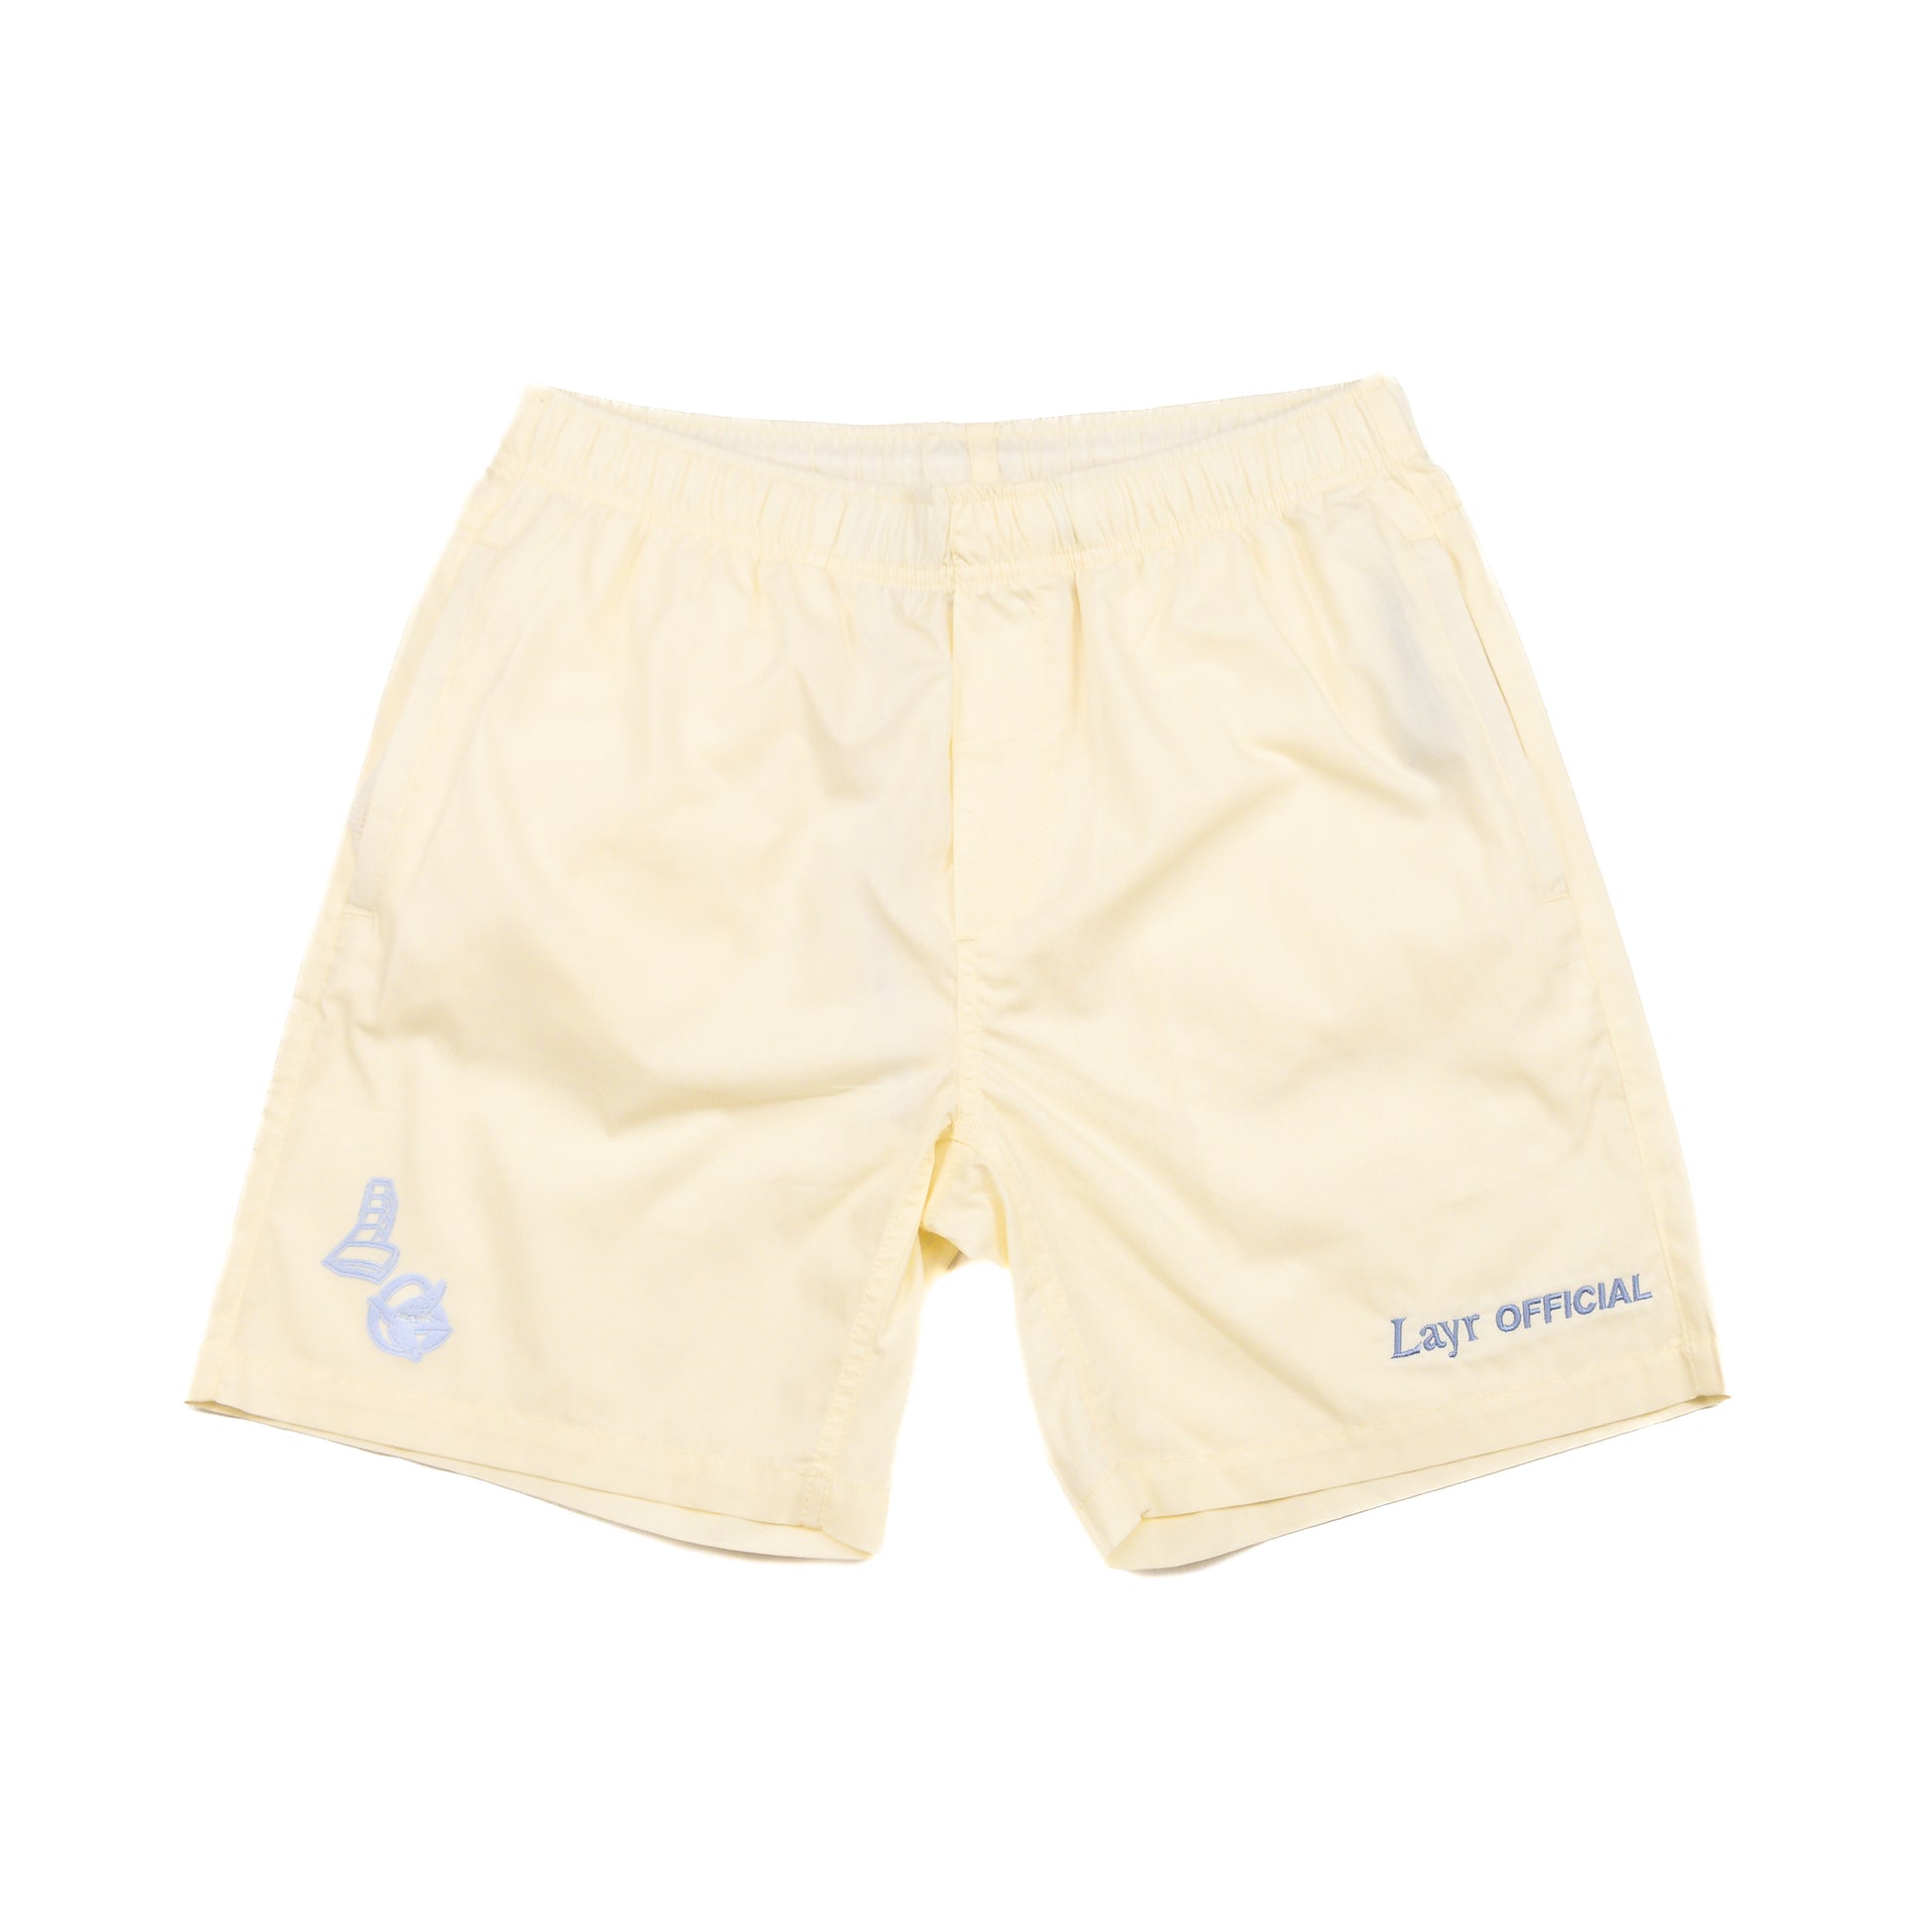 New Lo Surf Short, Cream - Layr Official